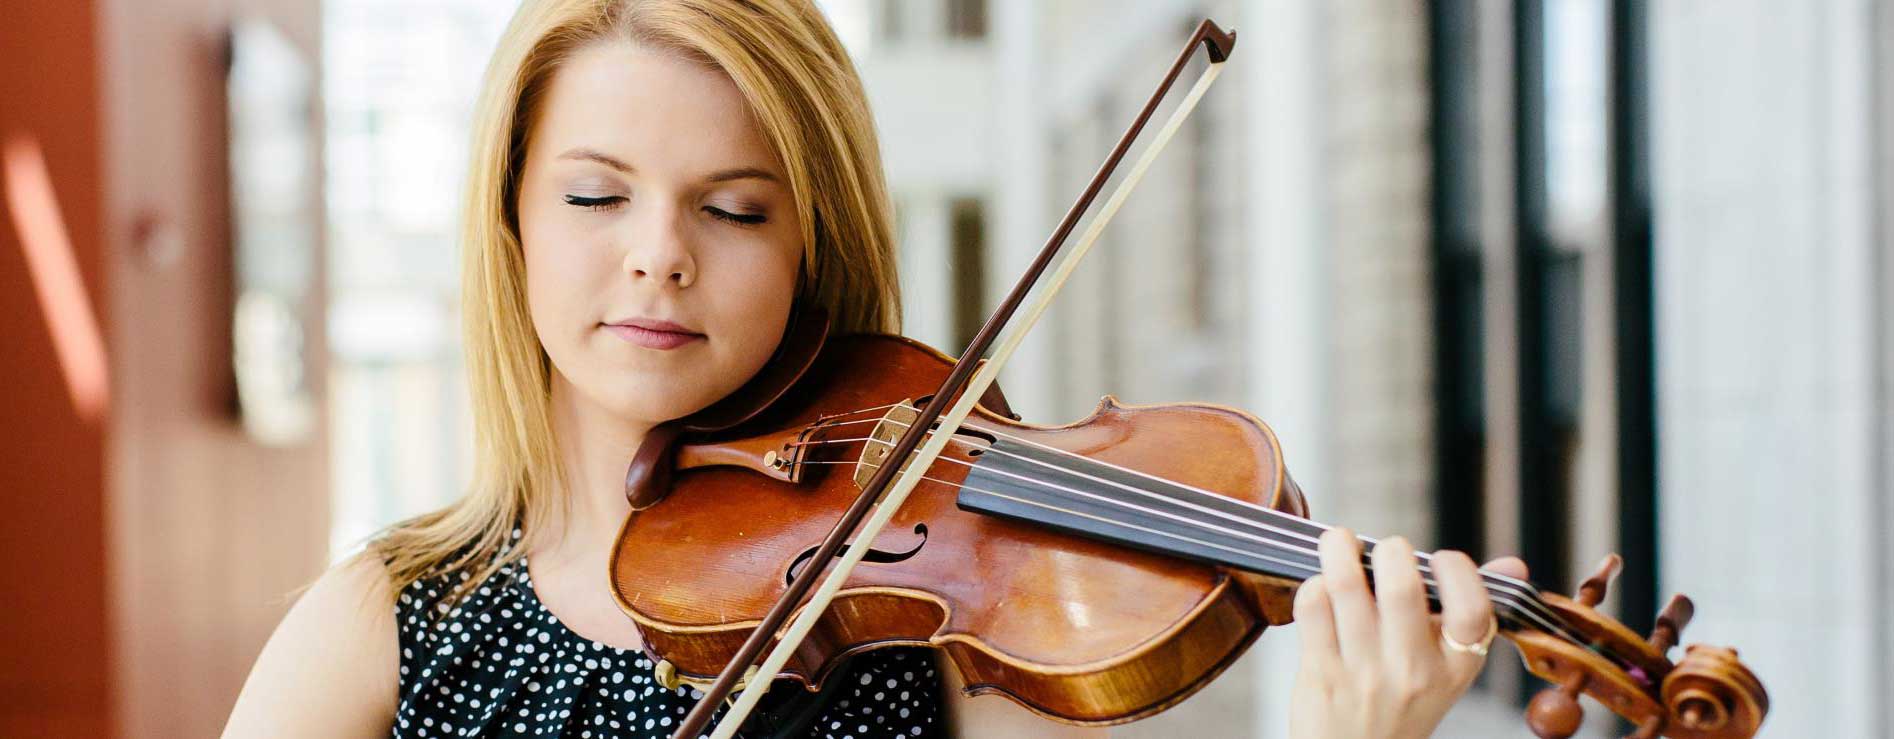 Student Playing a violin